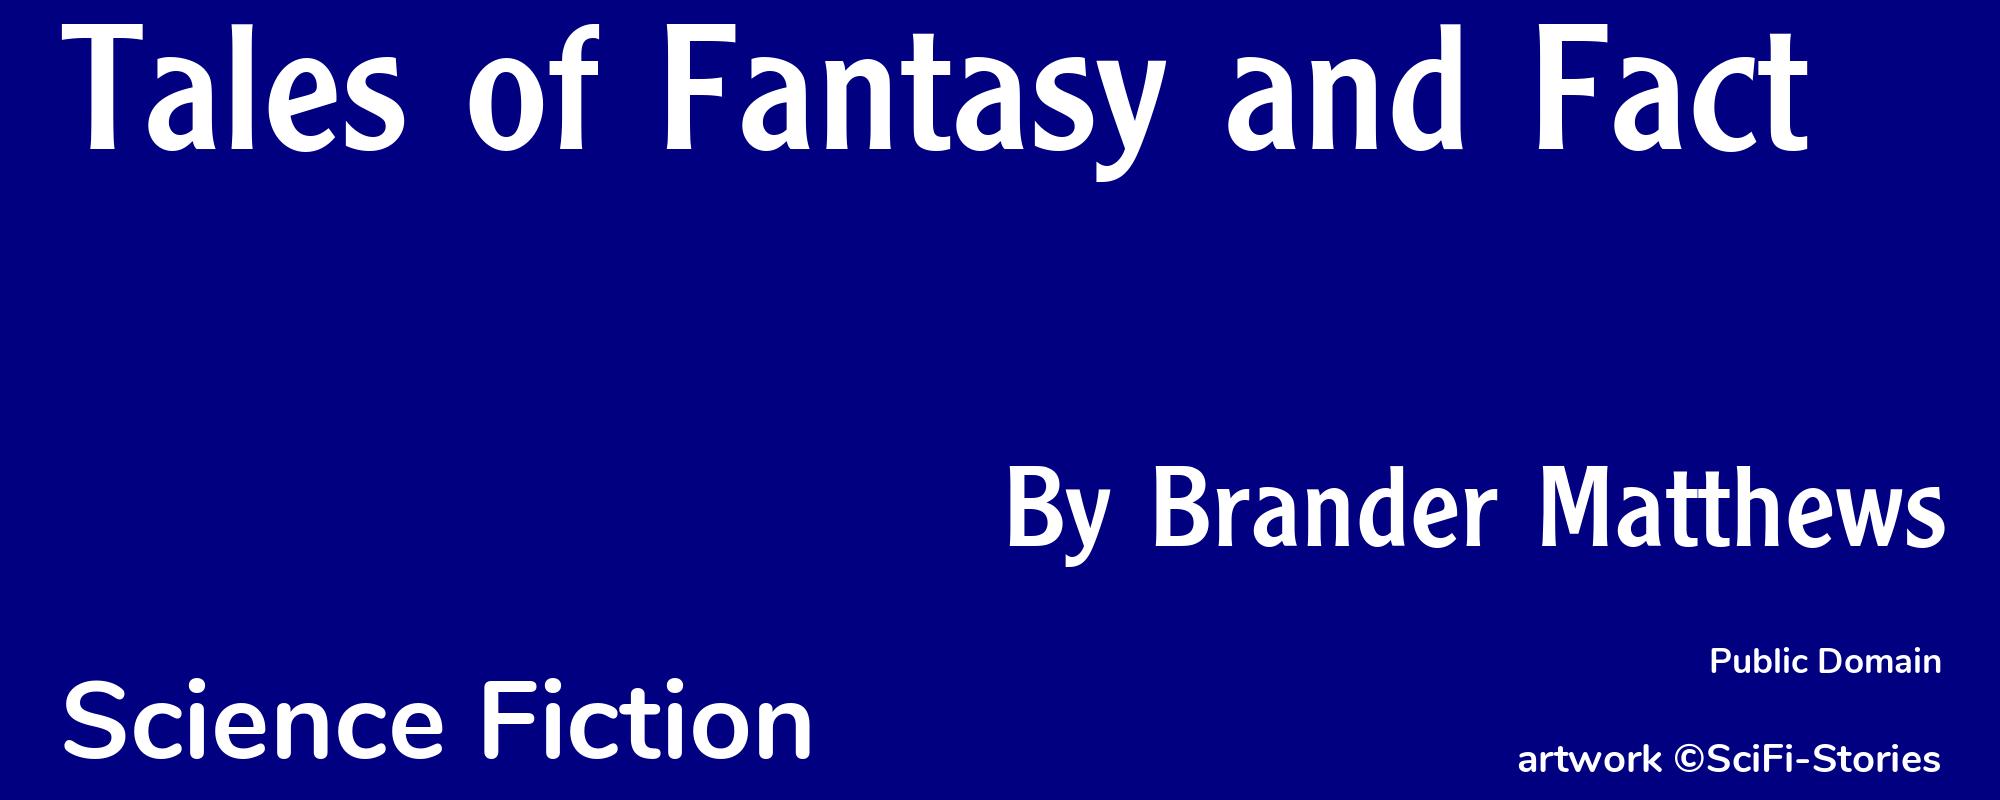 Tales of Fantasy and Fact - Cover